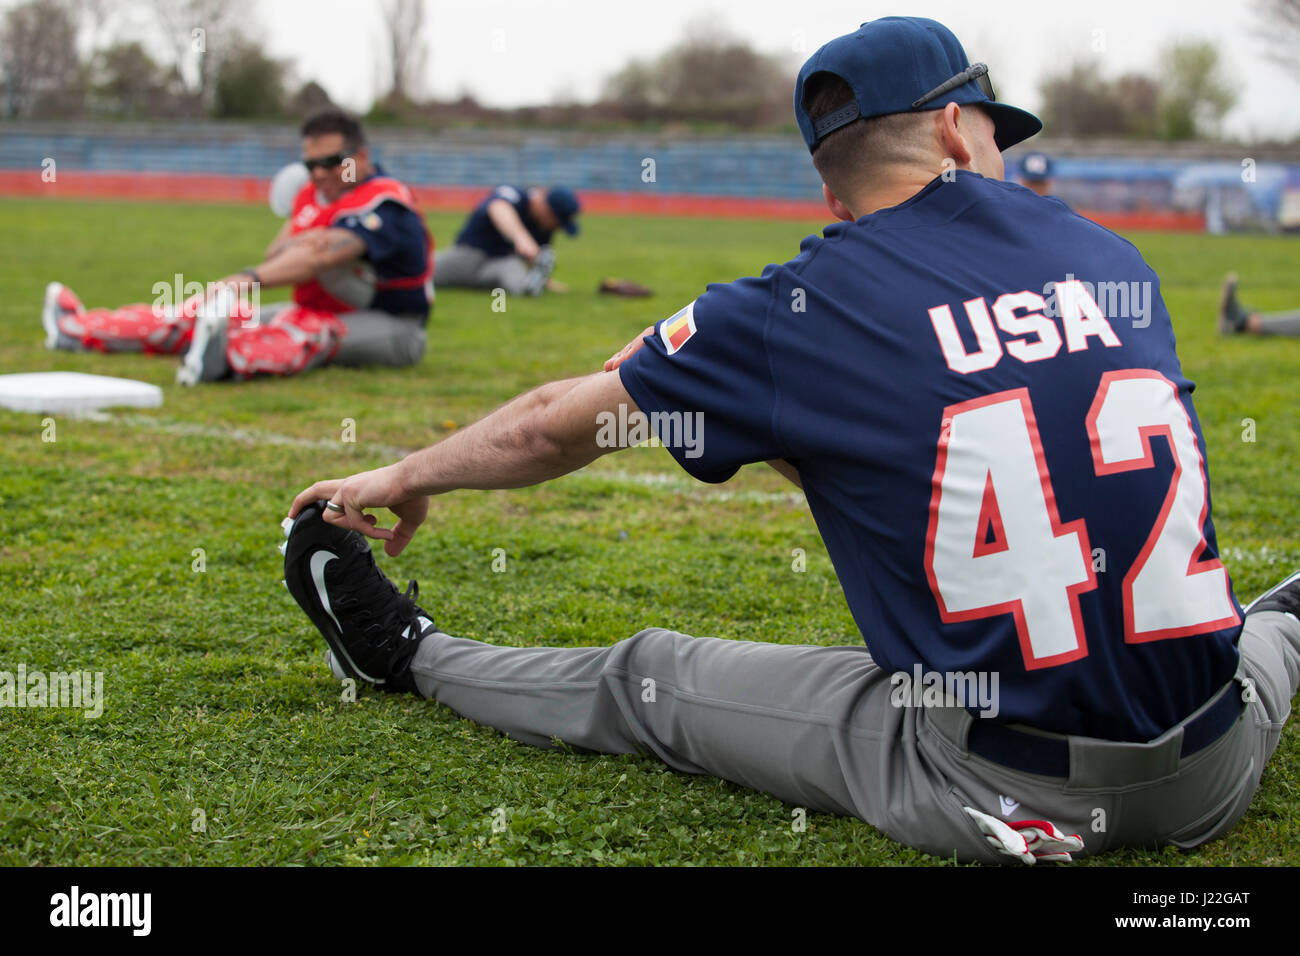 U.S. Marines with the Black Sea Rotational Force 17.1 stretch before the Jackie Robinson Day baseball game between the U.S. Marines and a Romanian team in Constanta, Romania April 15, 2017. The Marine and Romanian players all wore the number 42 jersey in honor of the 70th anniversary of Robinson becoming the first African American player in the Major League Baseball history. (U.S. Marine Corps photo by Cpl. Emily Dorumsgaard) Stock Photo